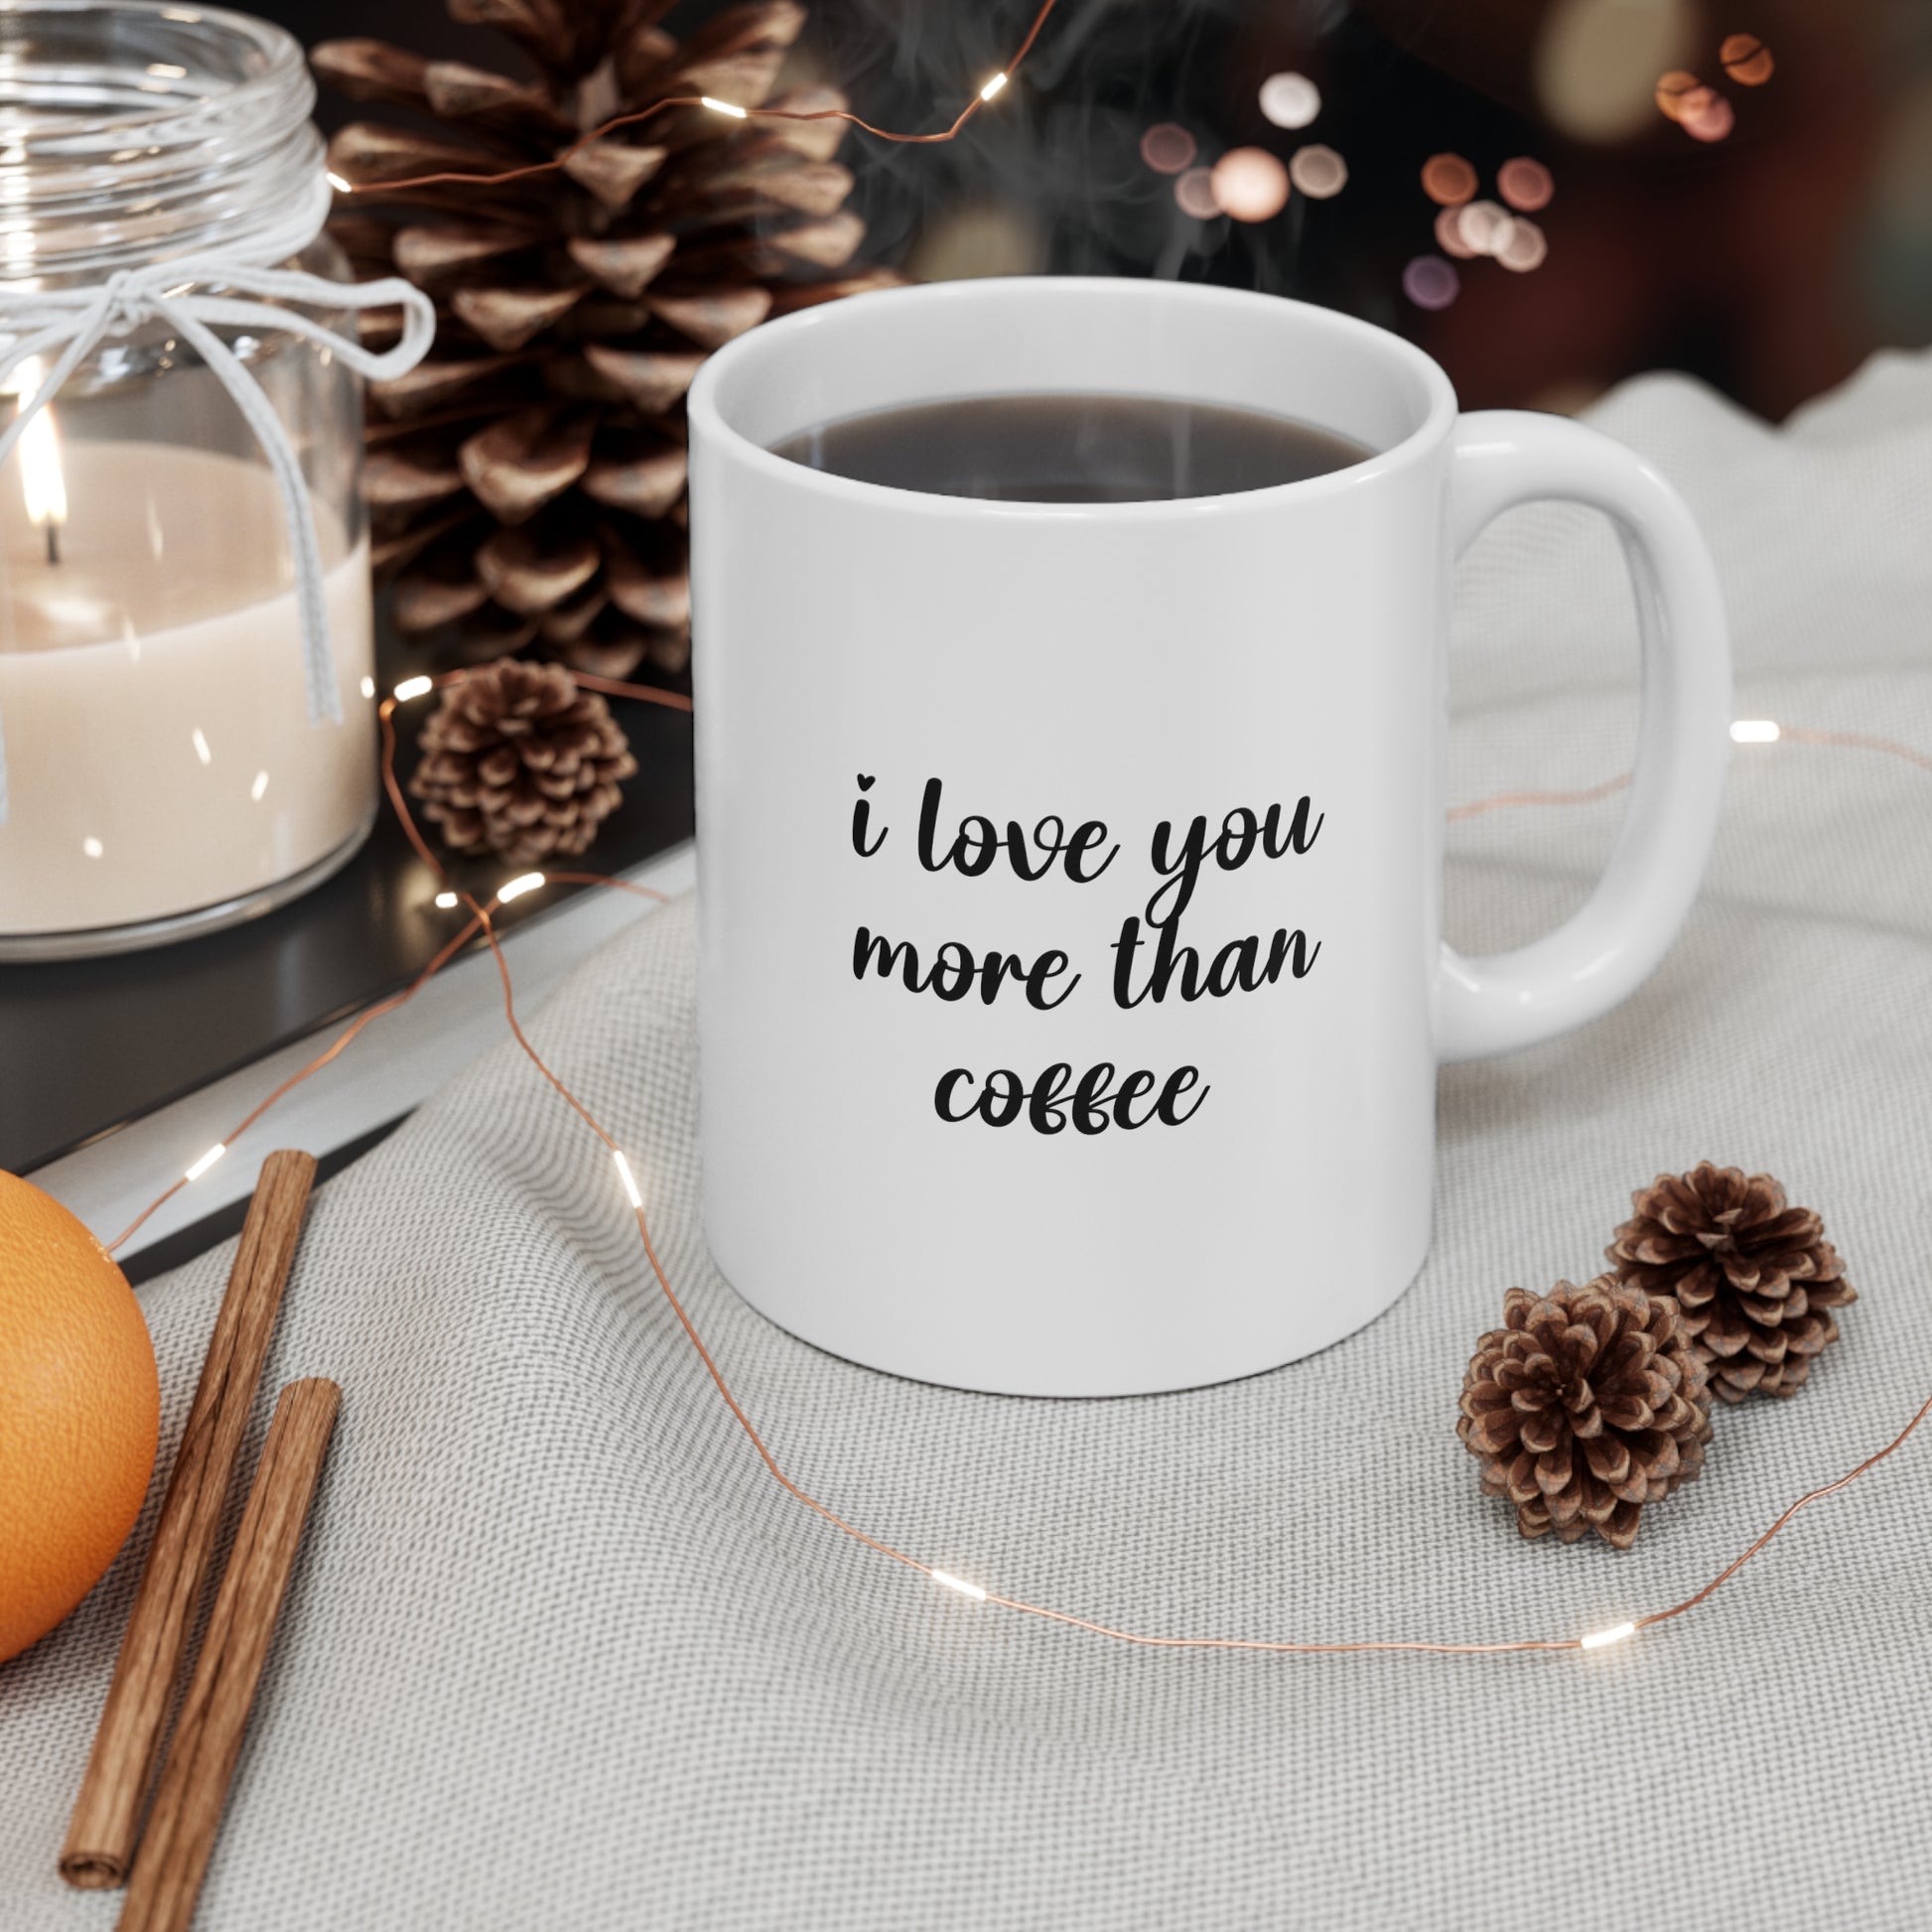 ceramic mug with quote: I love you more than coffee